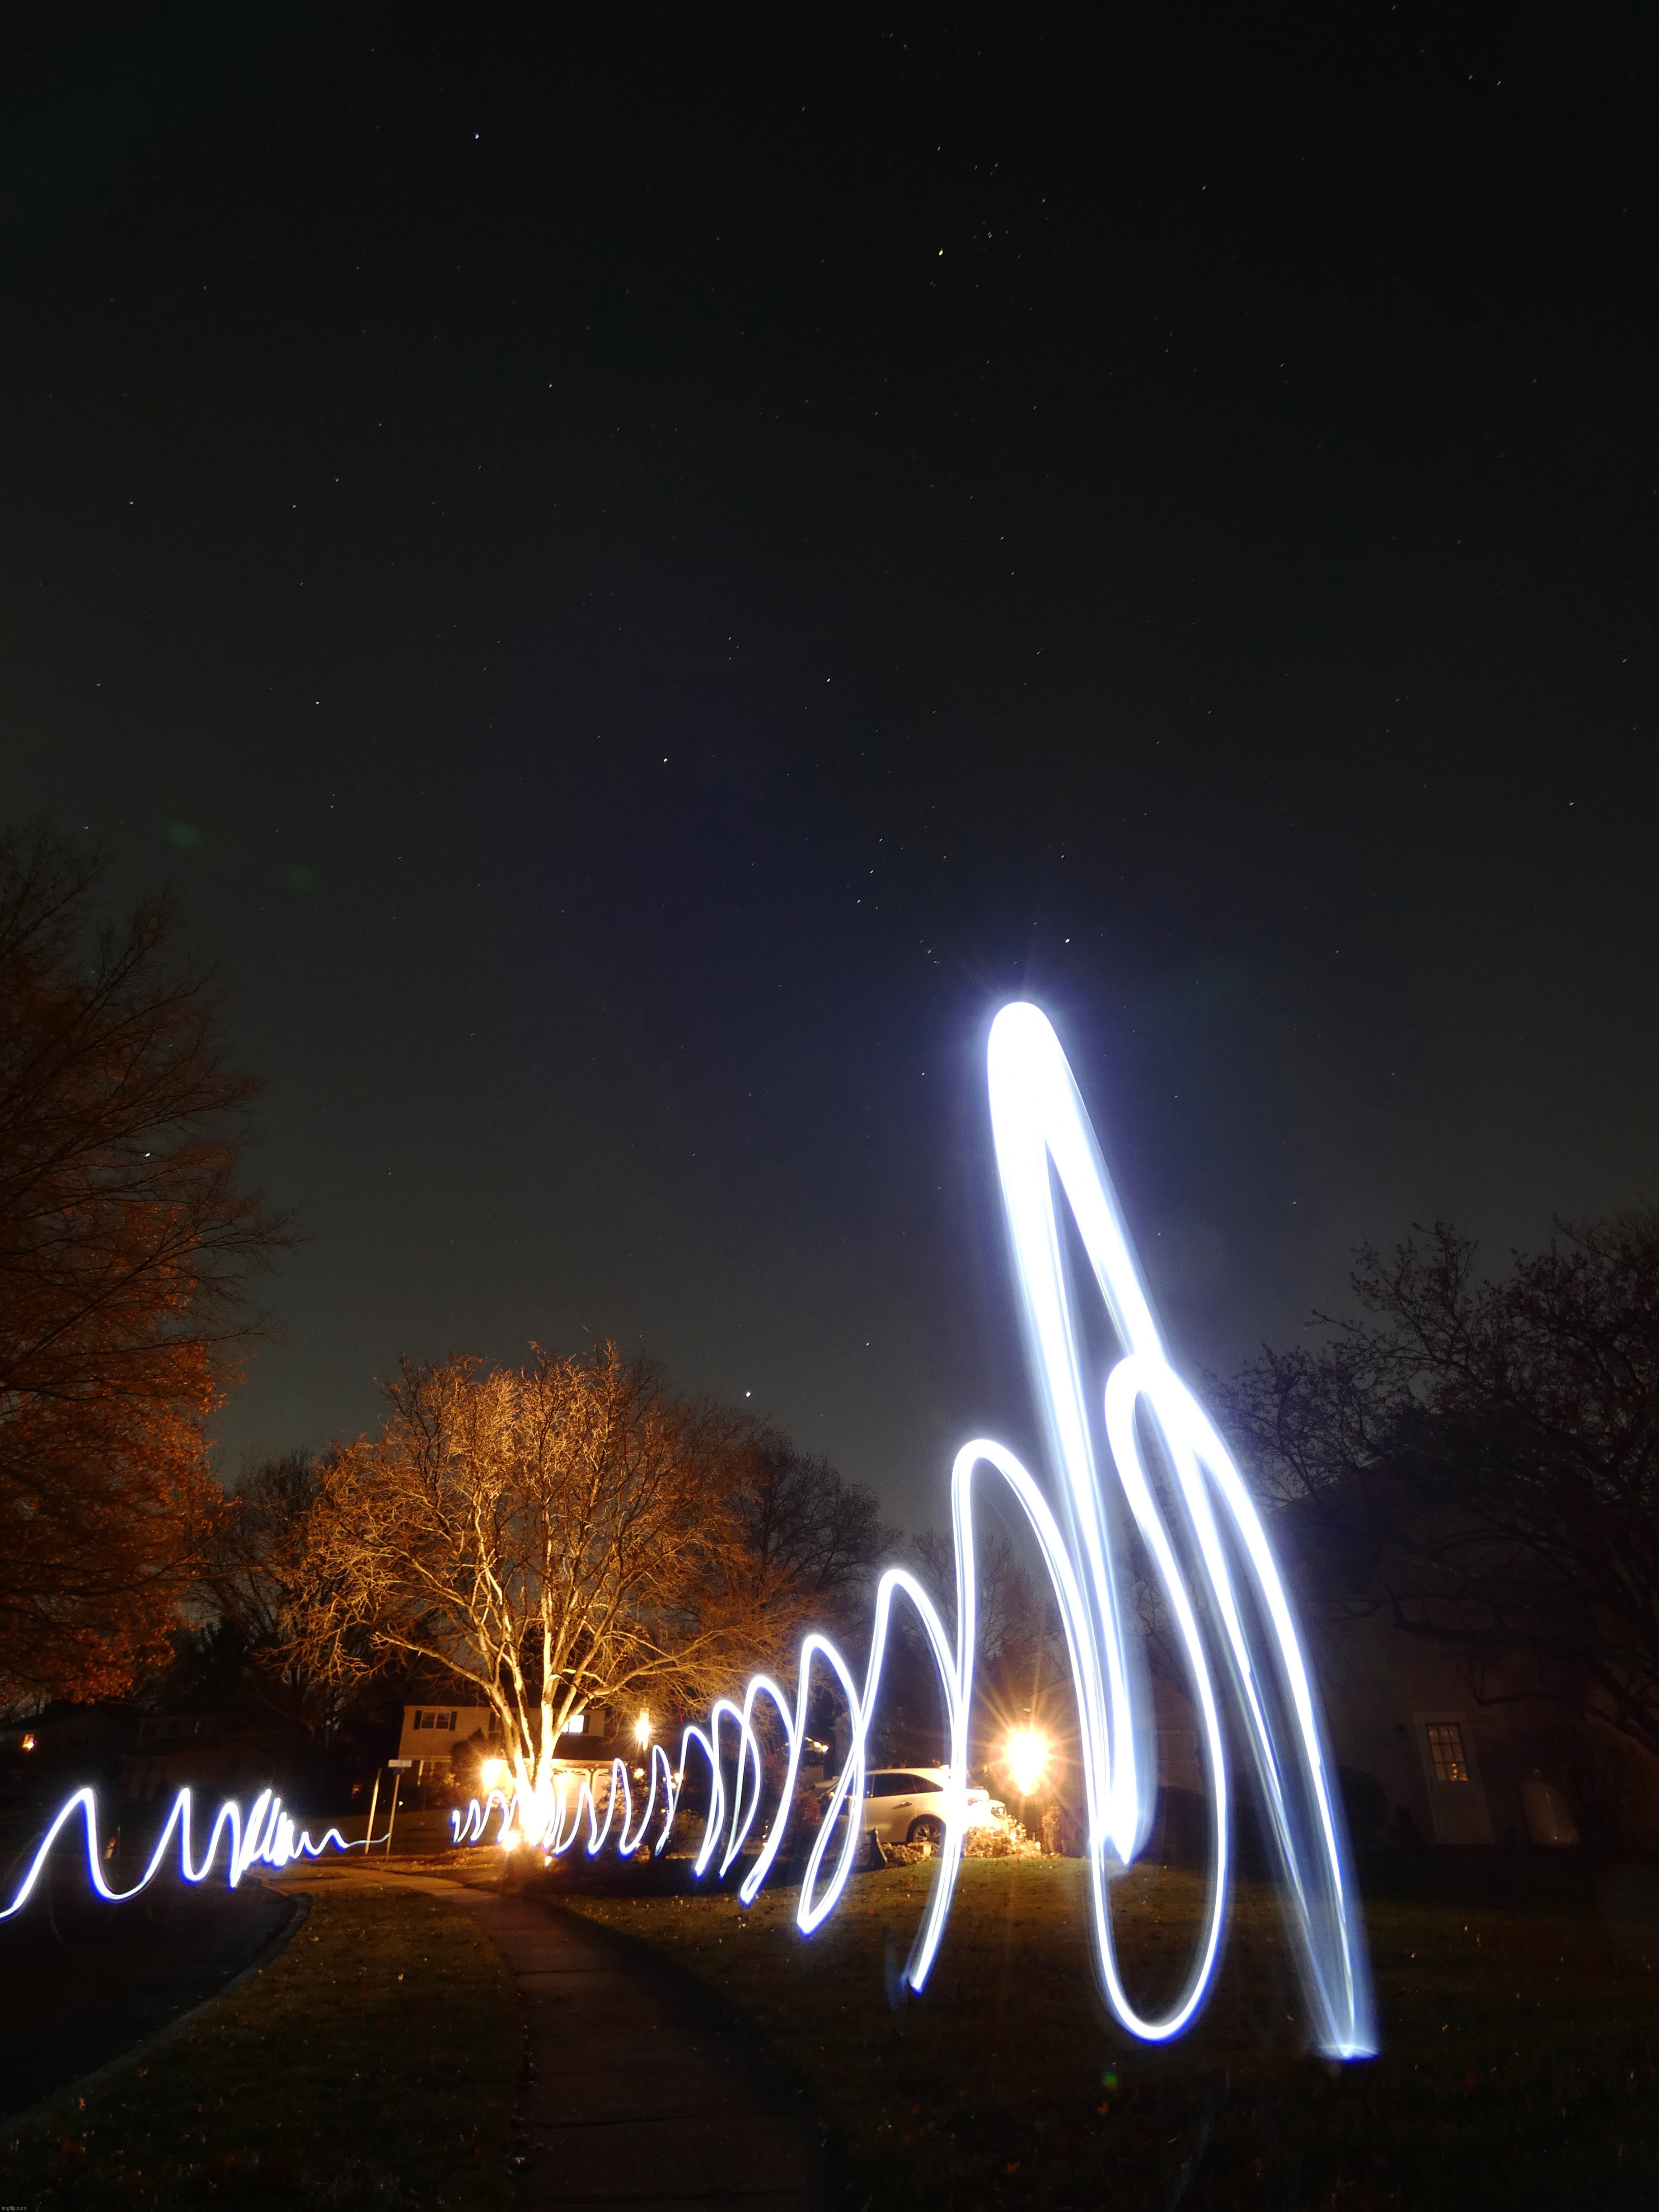 Wavy Lights | image tagged in share your own photos,photography | made w/ Imgflip meme maker